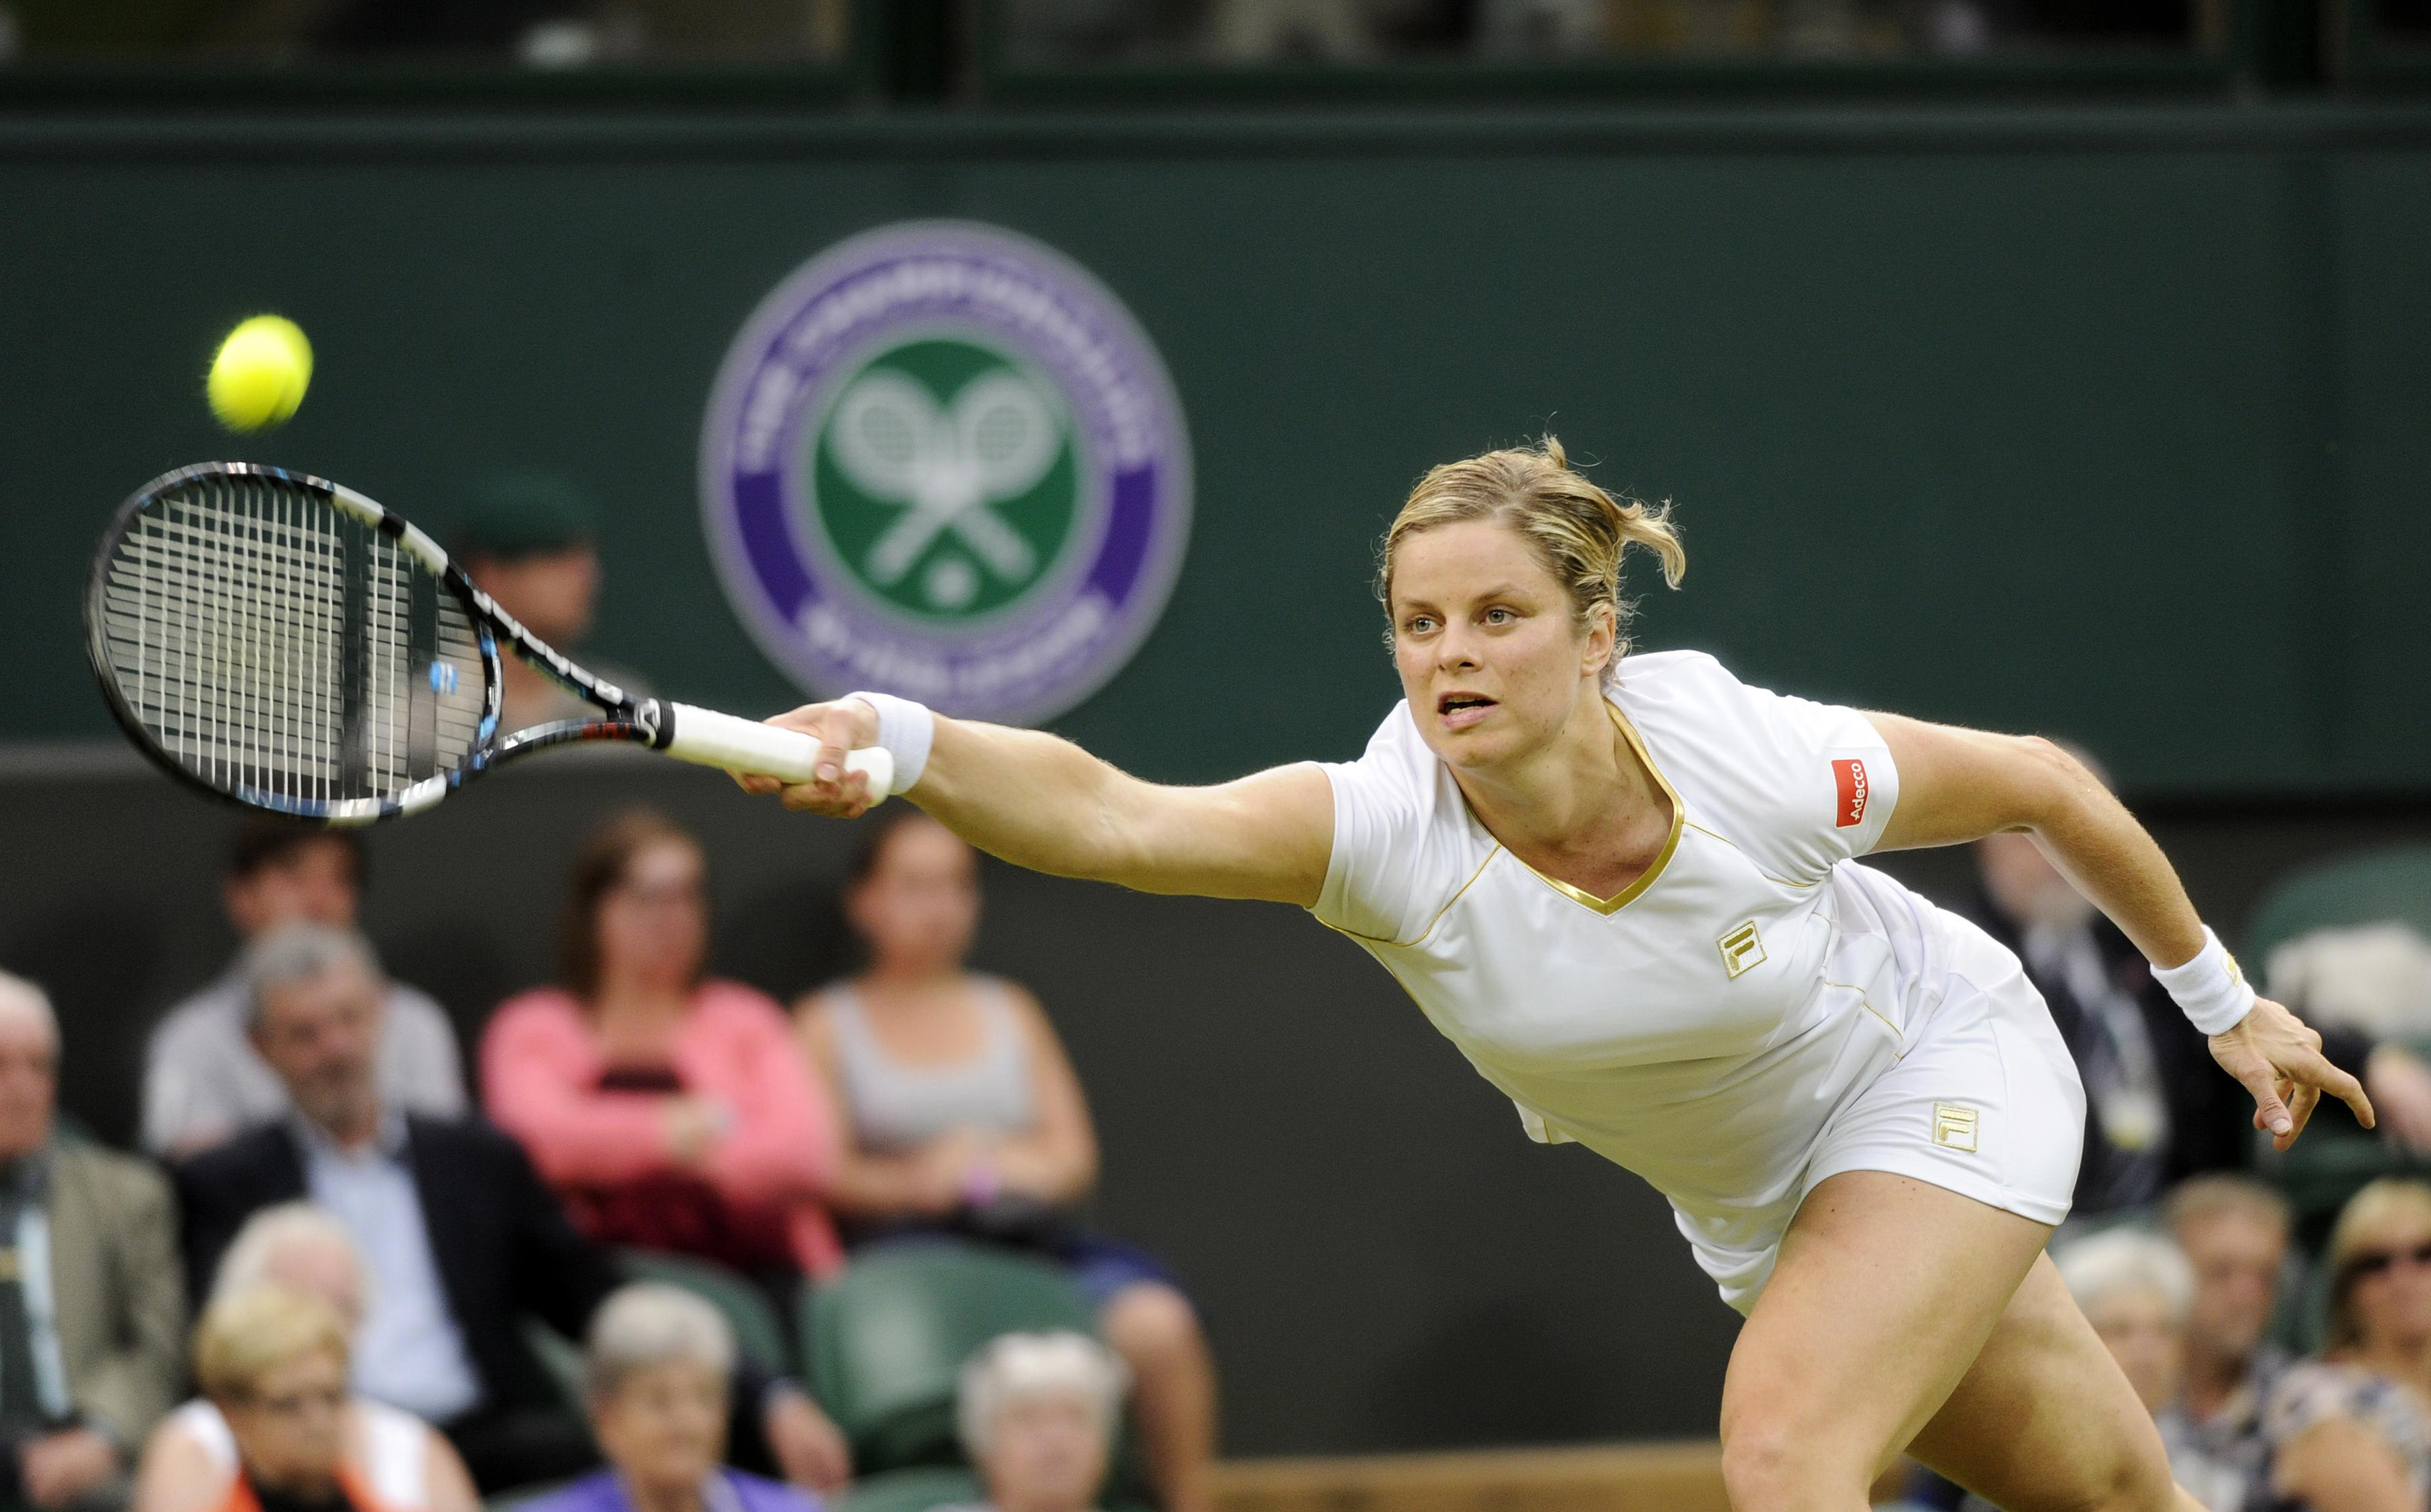 Belgium's Kim Clijsters in action against Czech Republic's Andrea Hlavackova during day three of the 2012 Wimbledon Championships